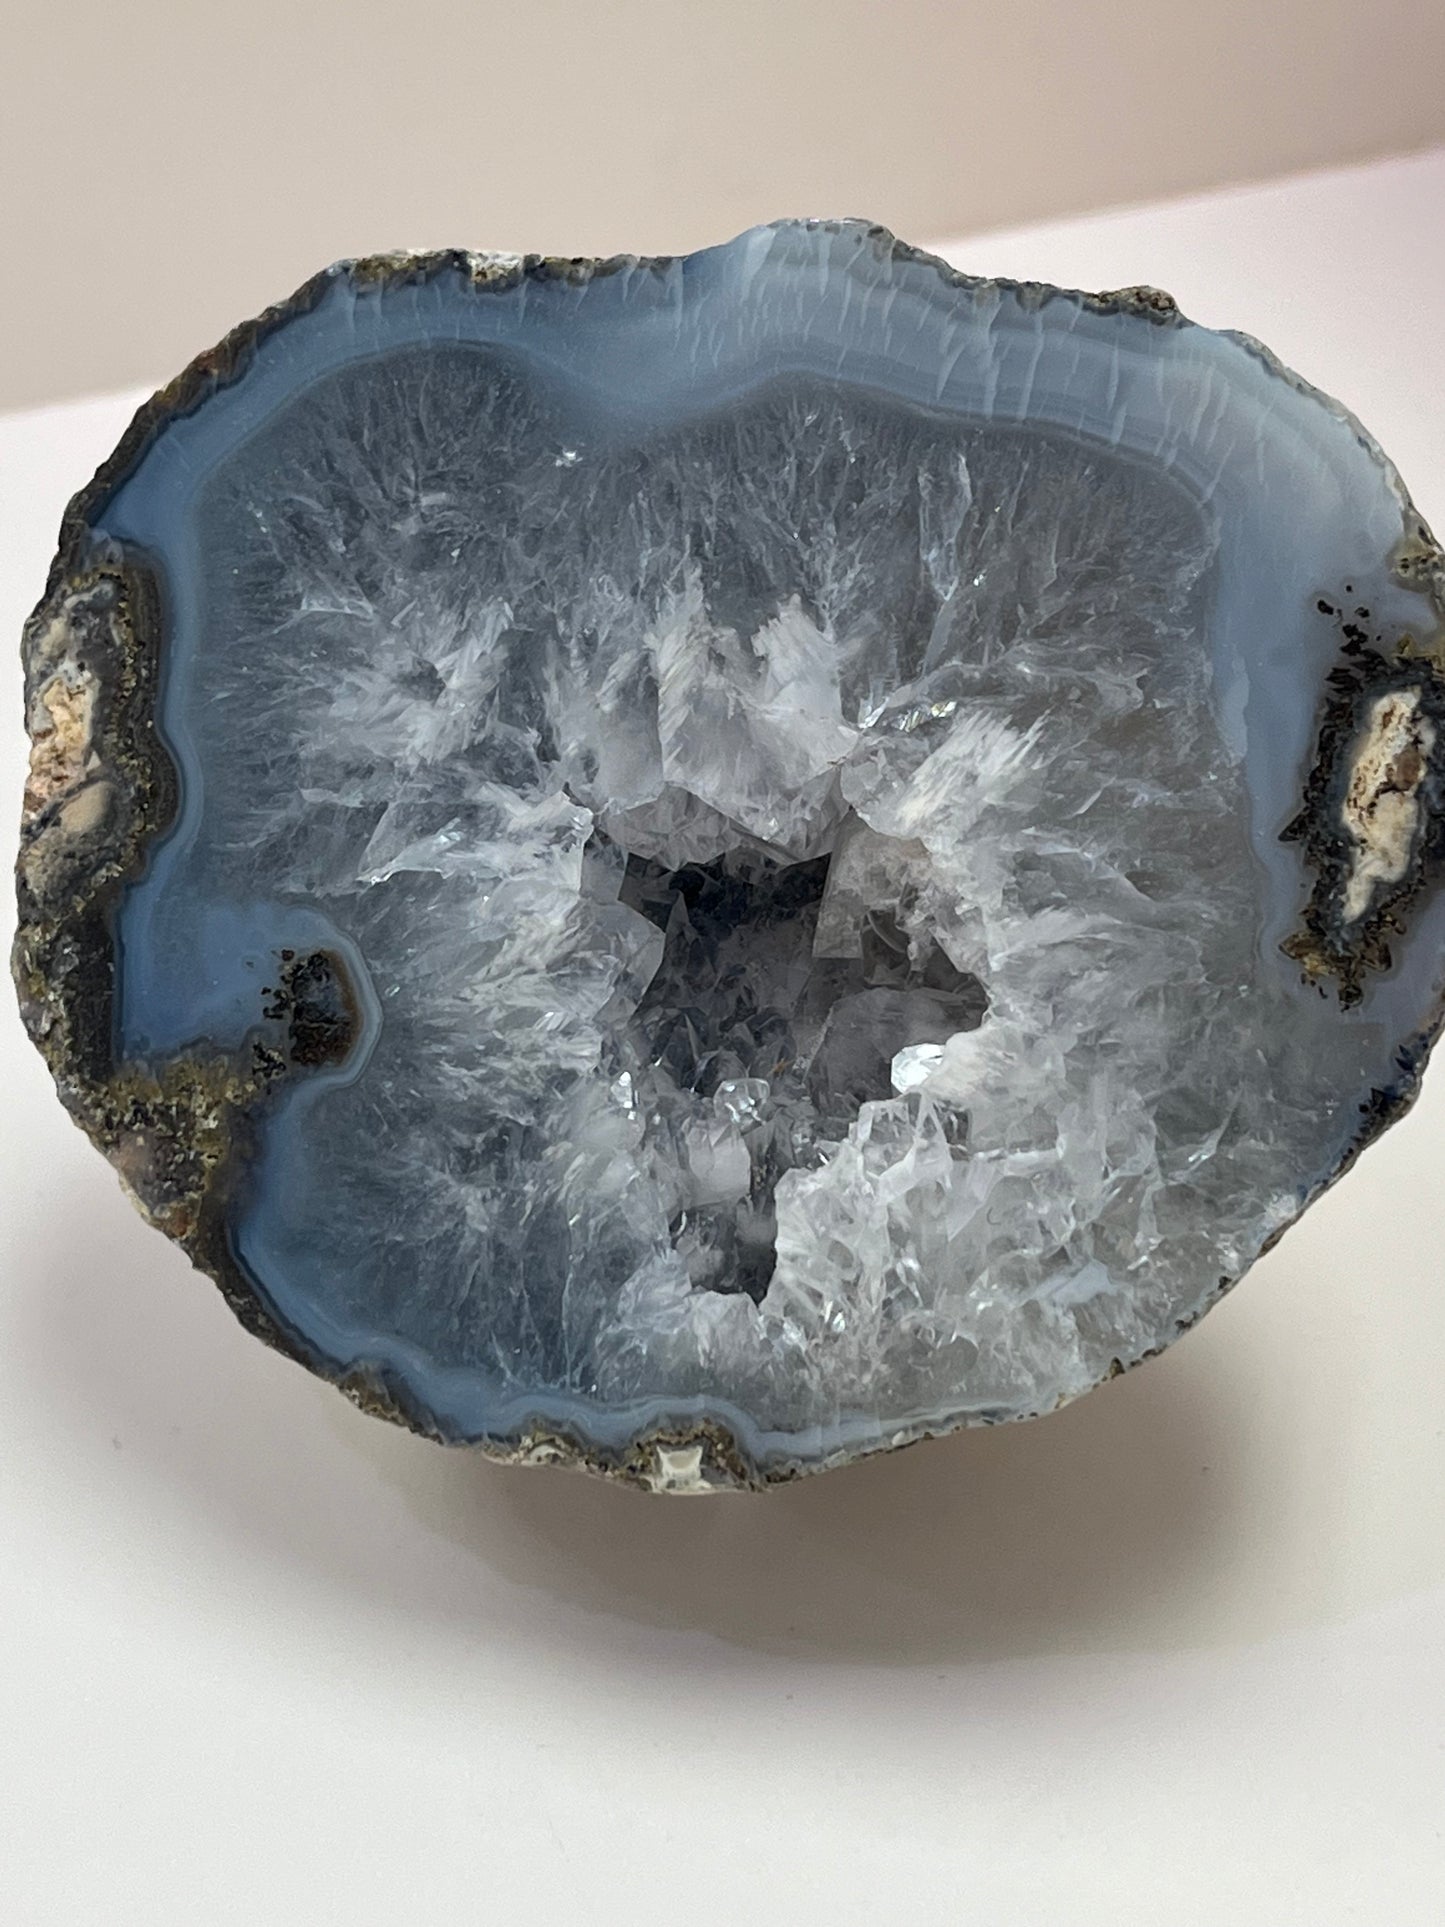 Coconut Geode Polished Half (Las Choyas), choose your own